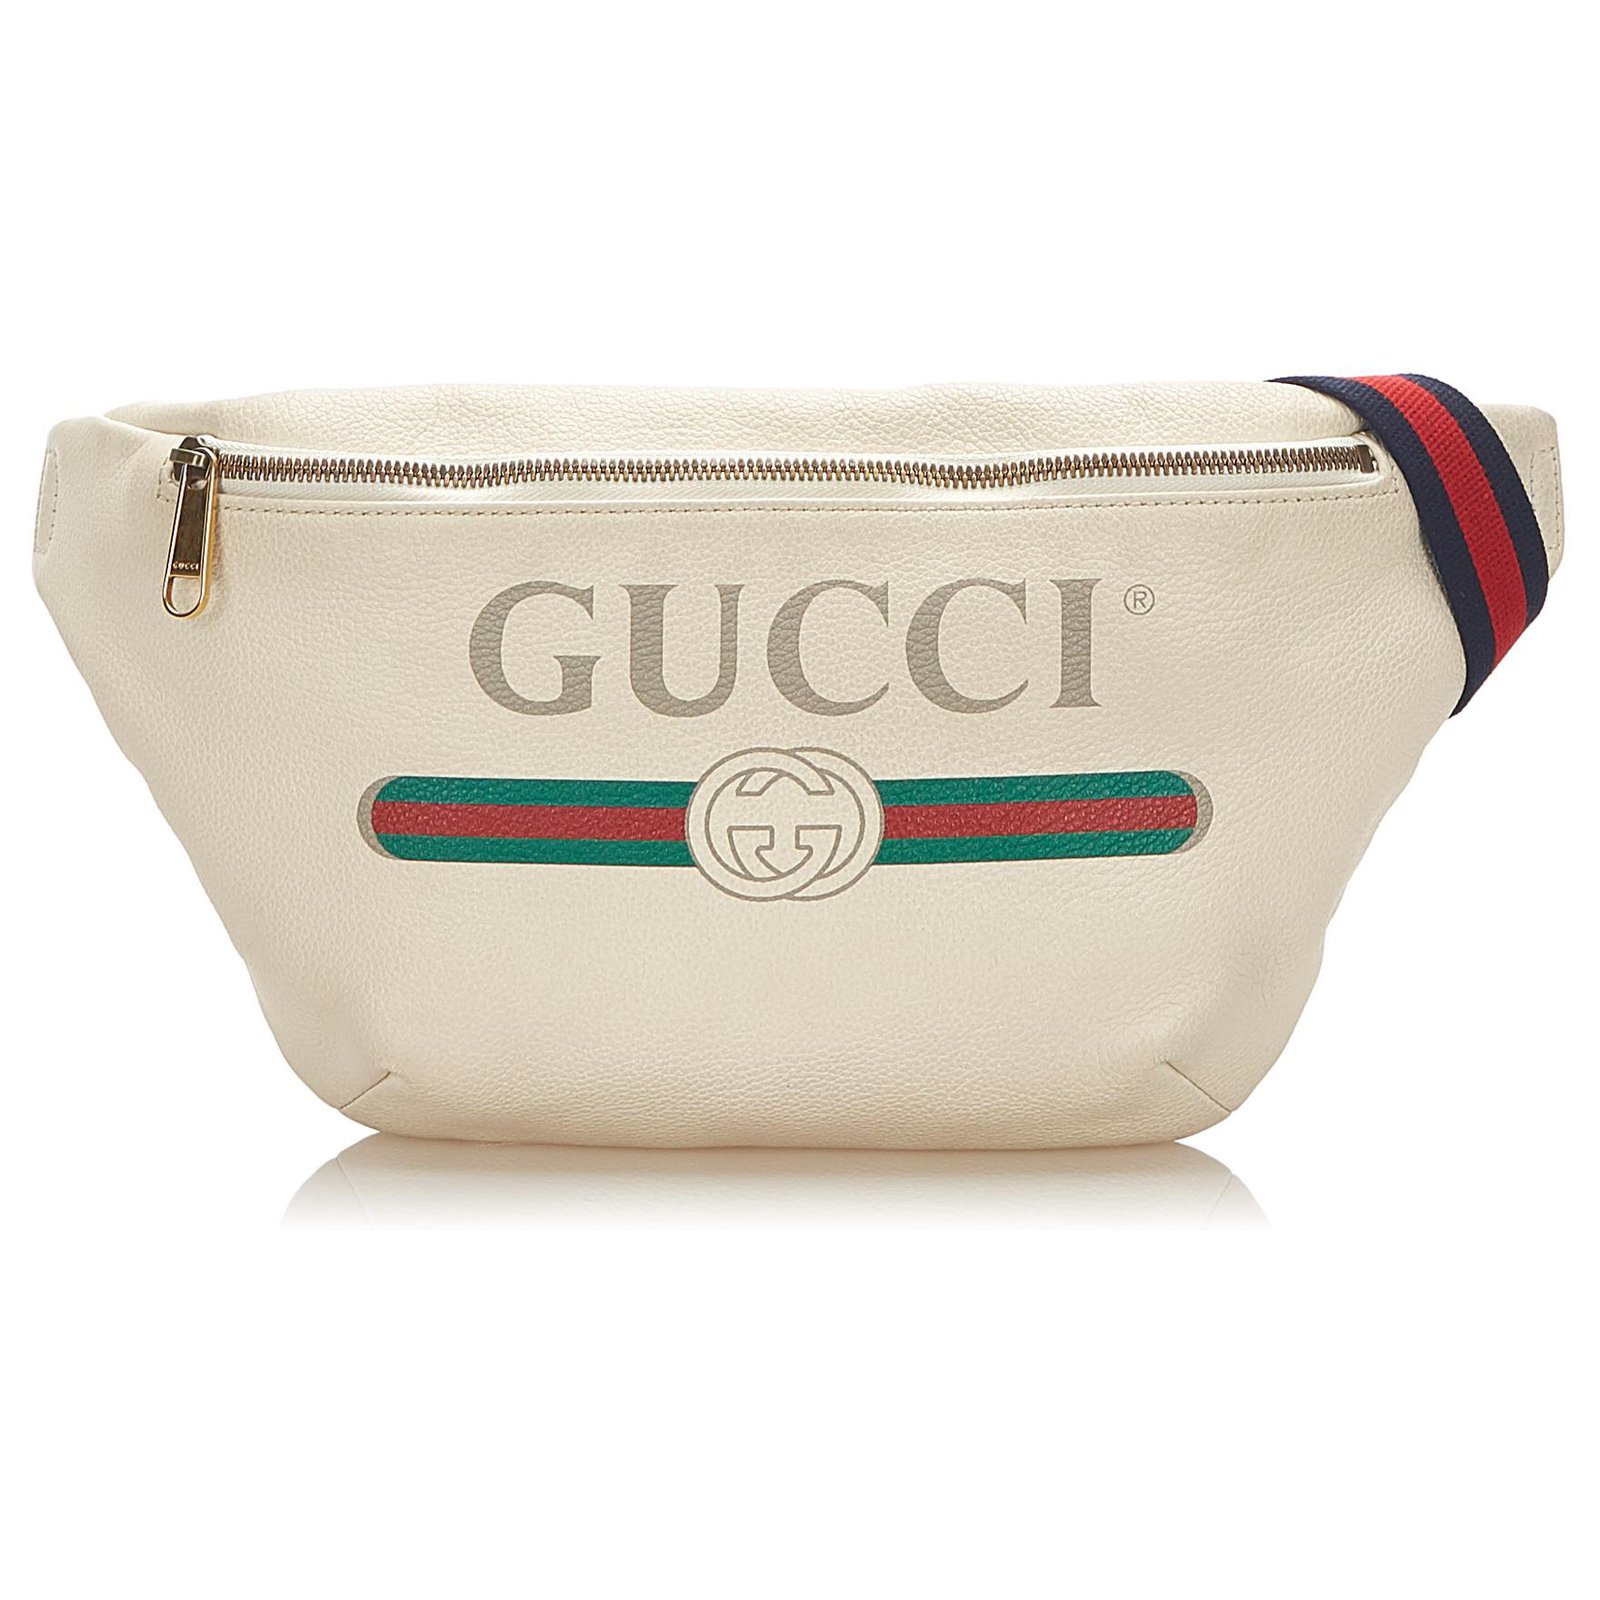 Gucci White Logo Leather Belt Bag Multiple colors Pony-style